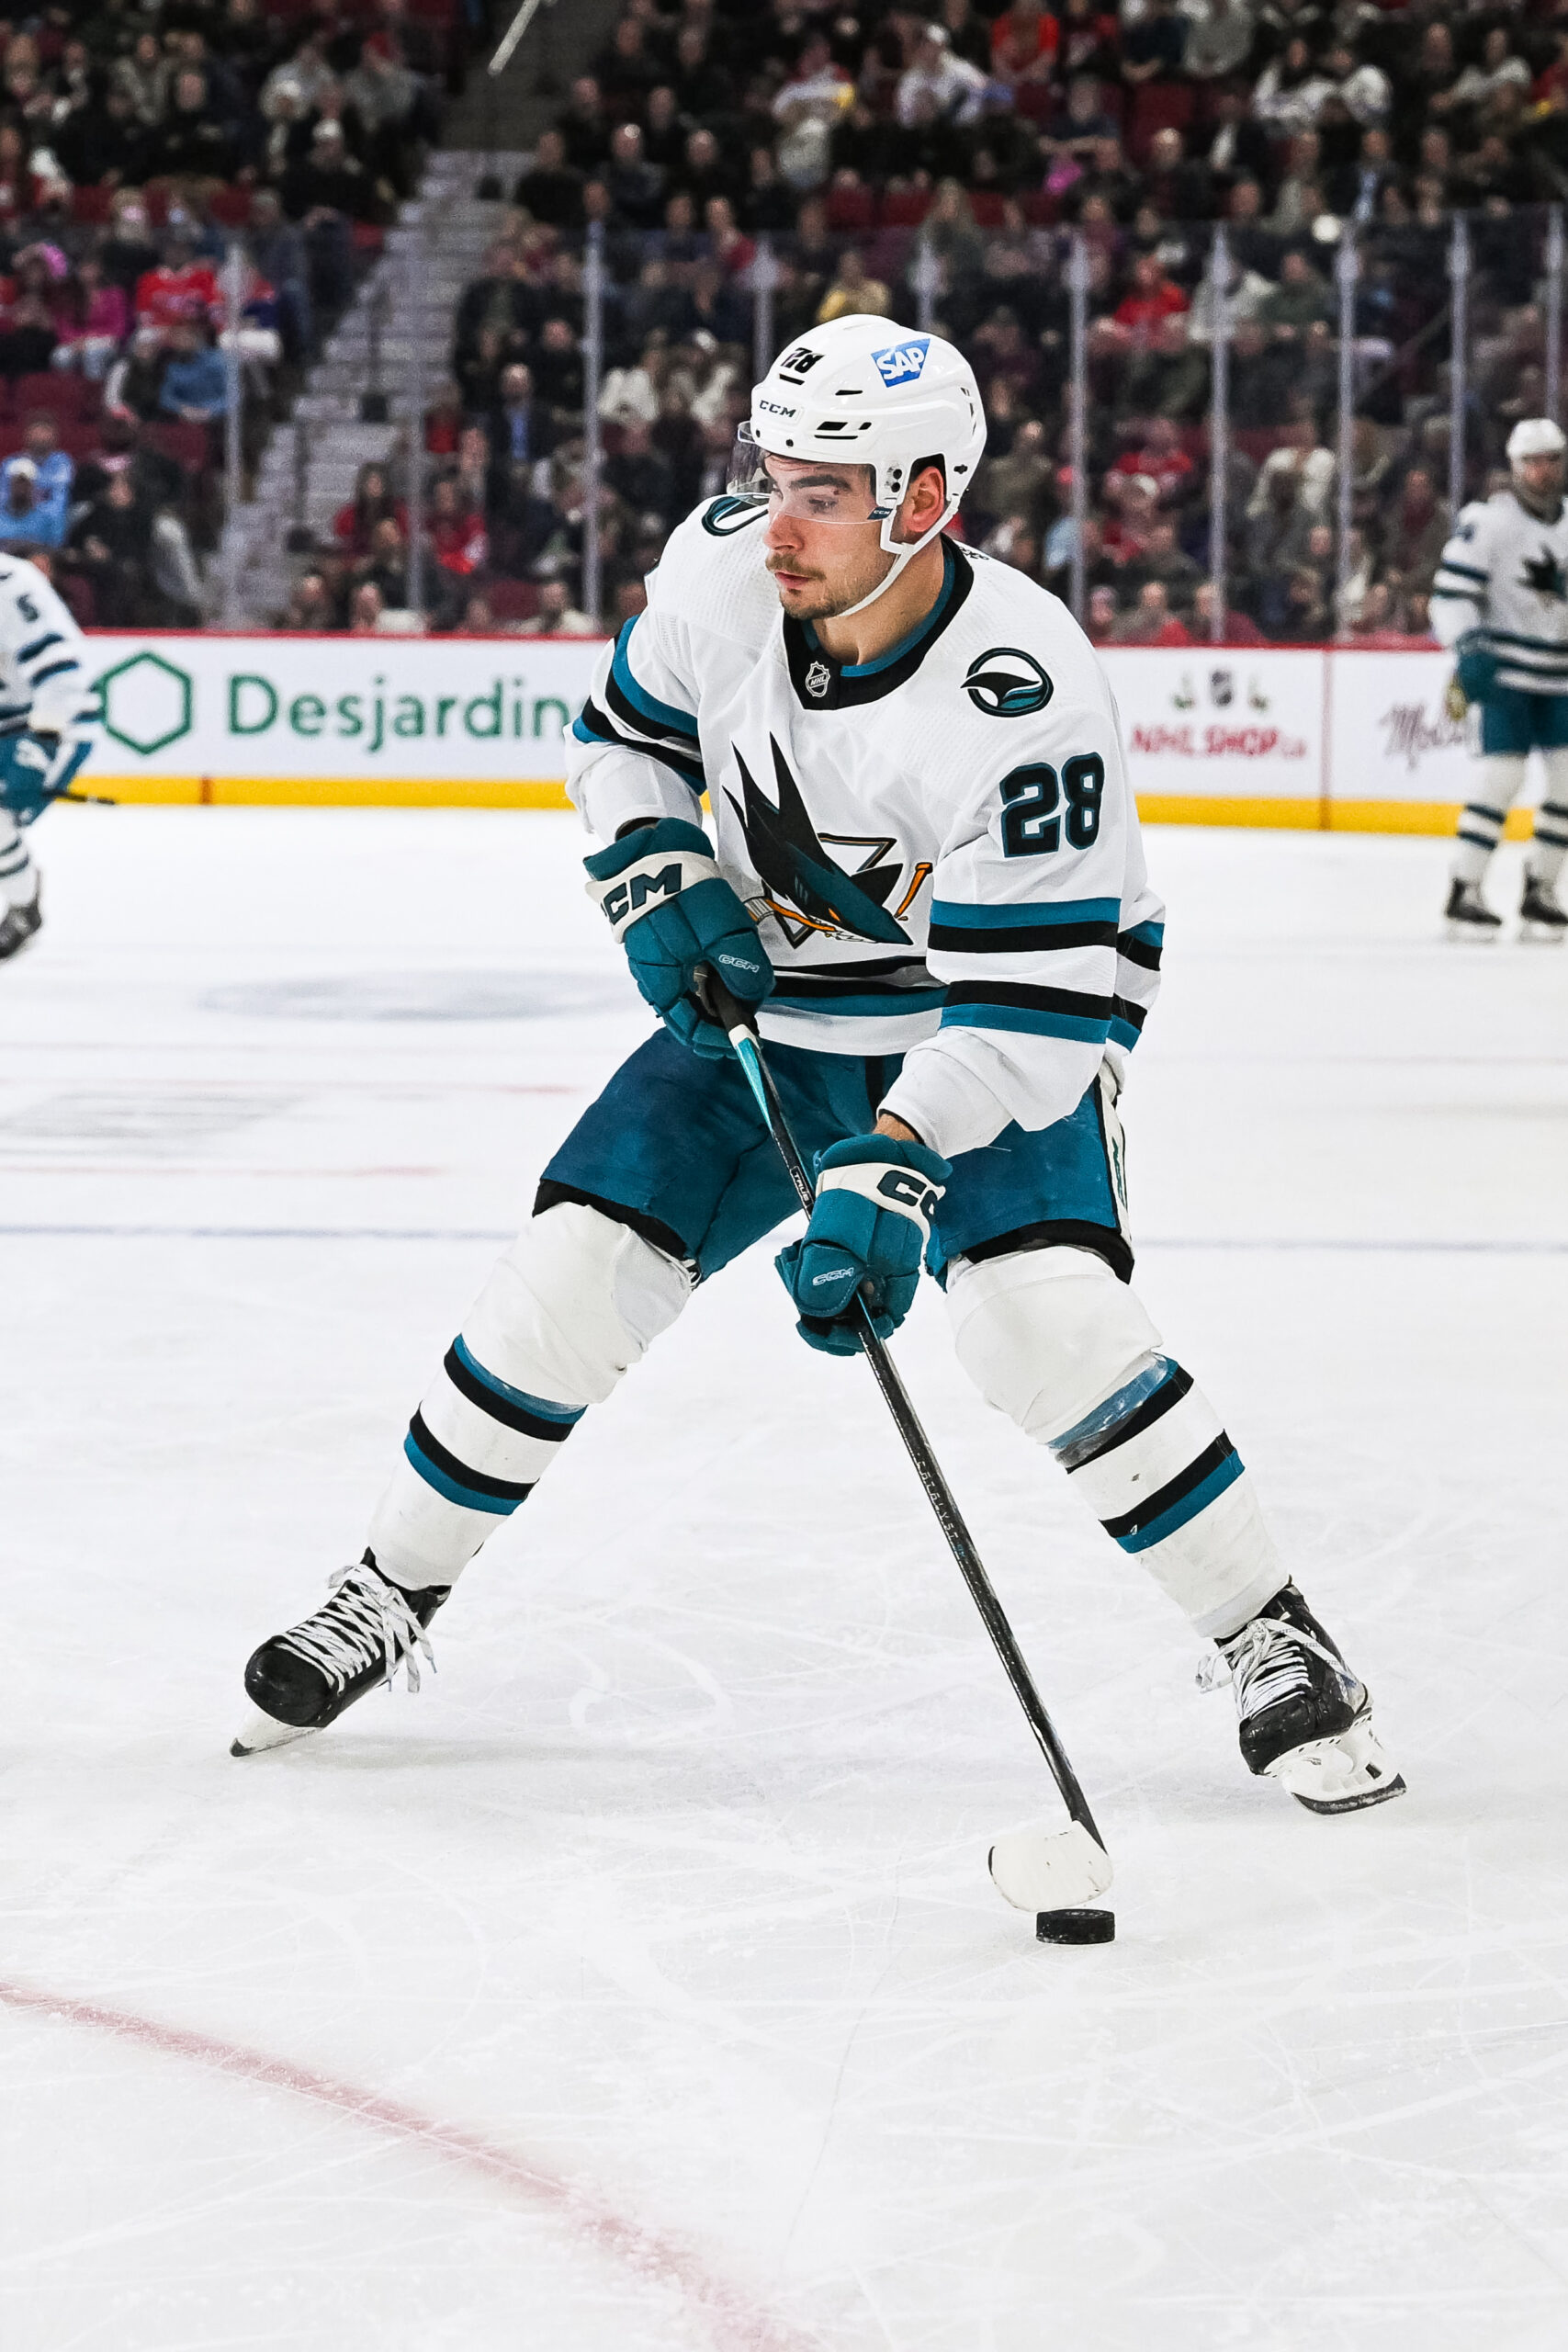 Timo Meier headed to the New Jersey Devils?